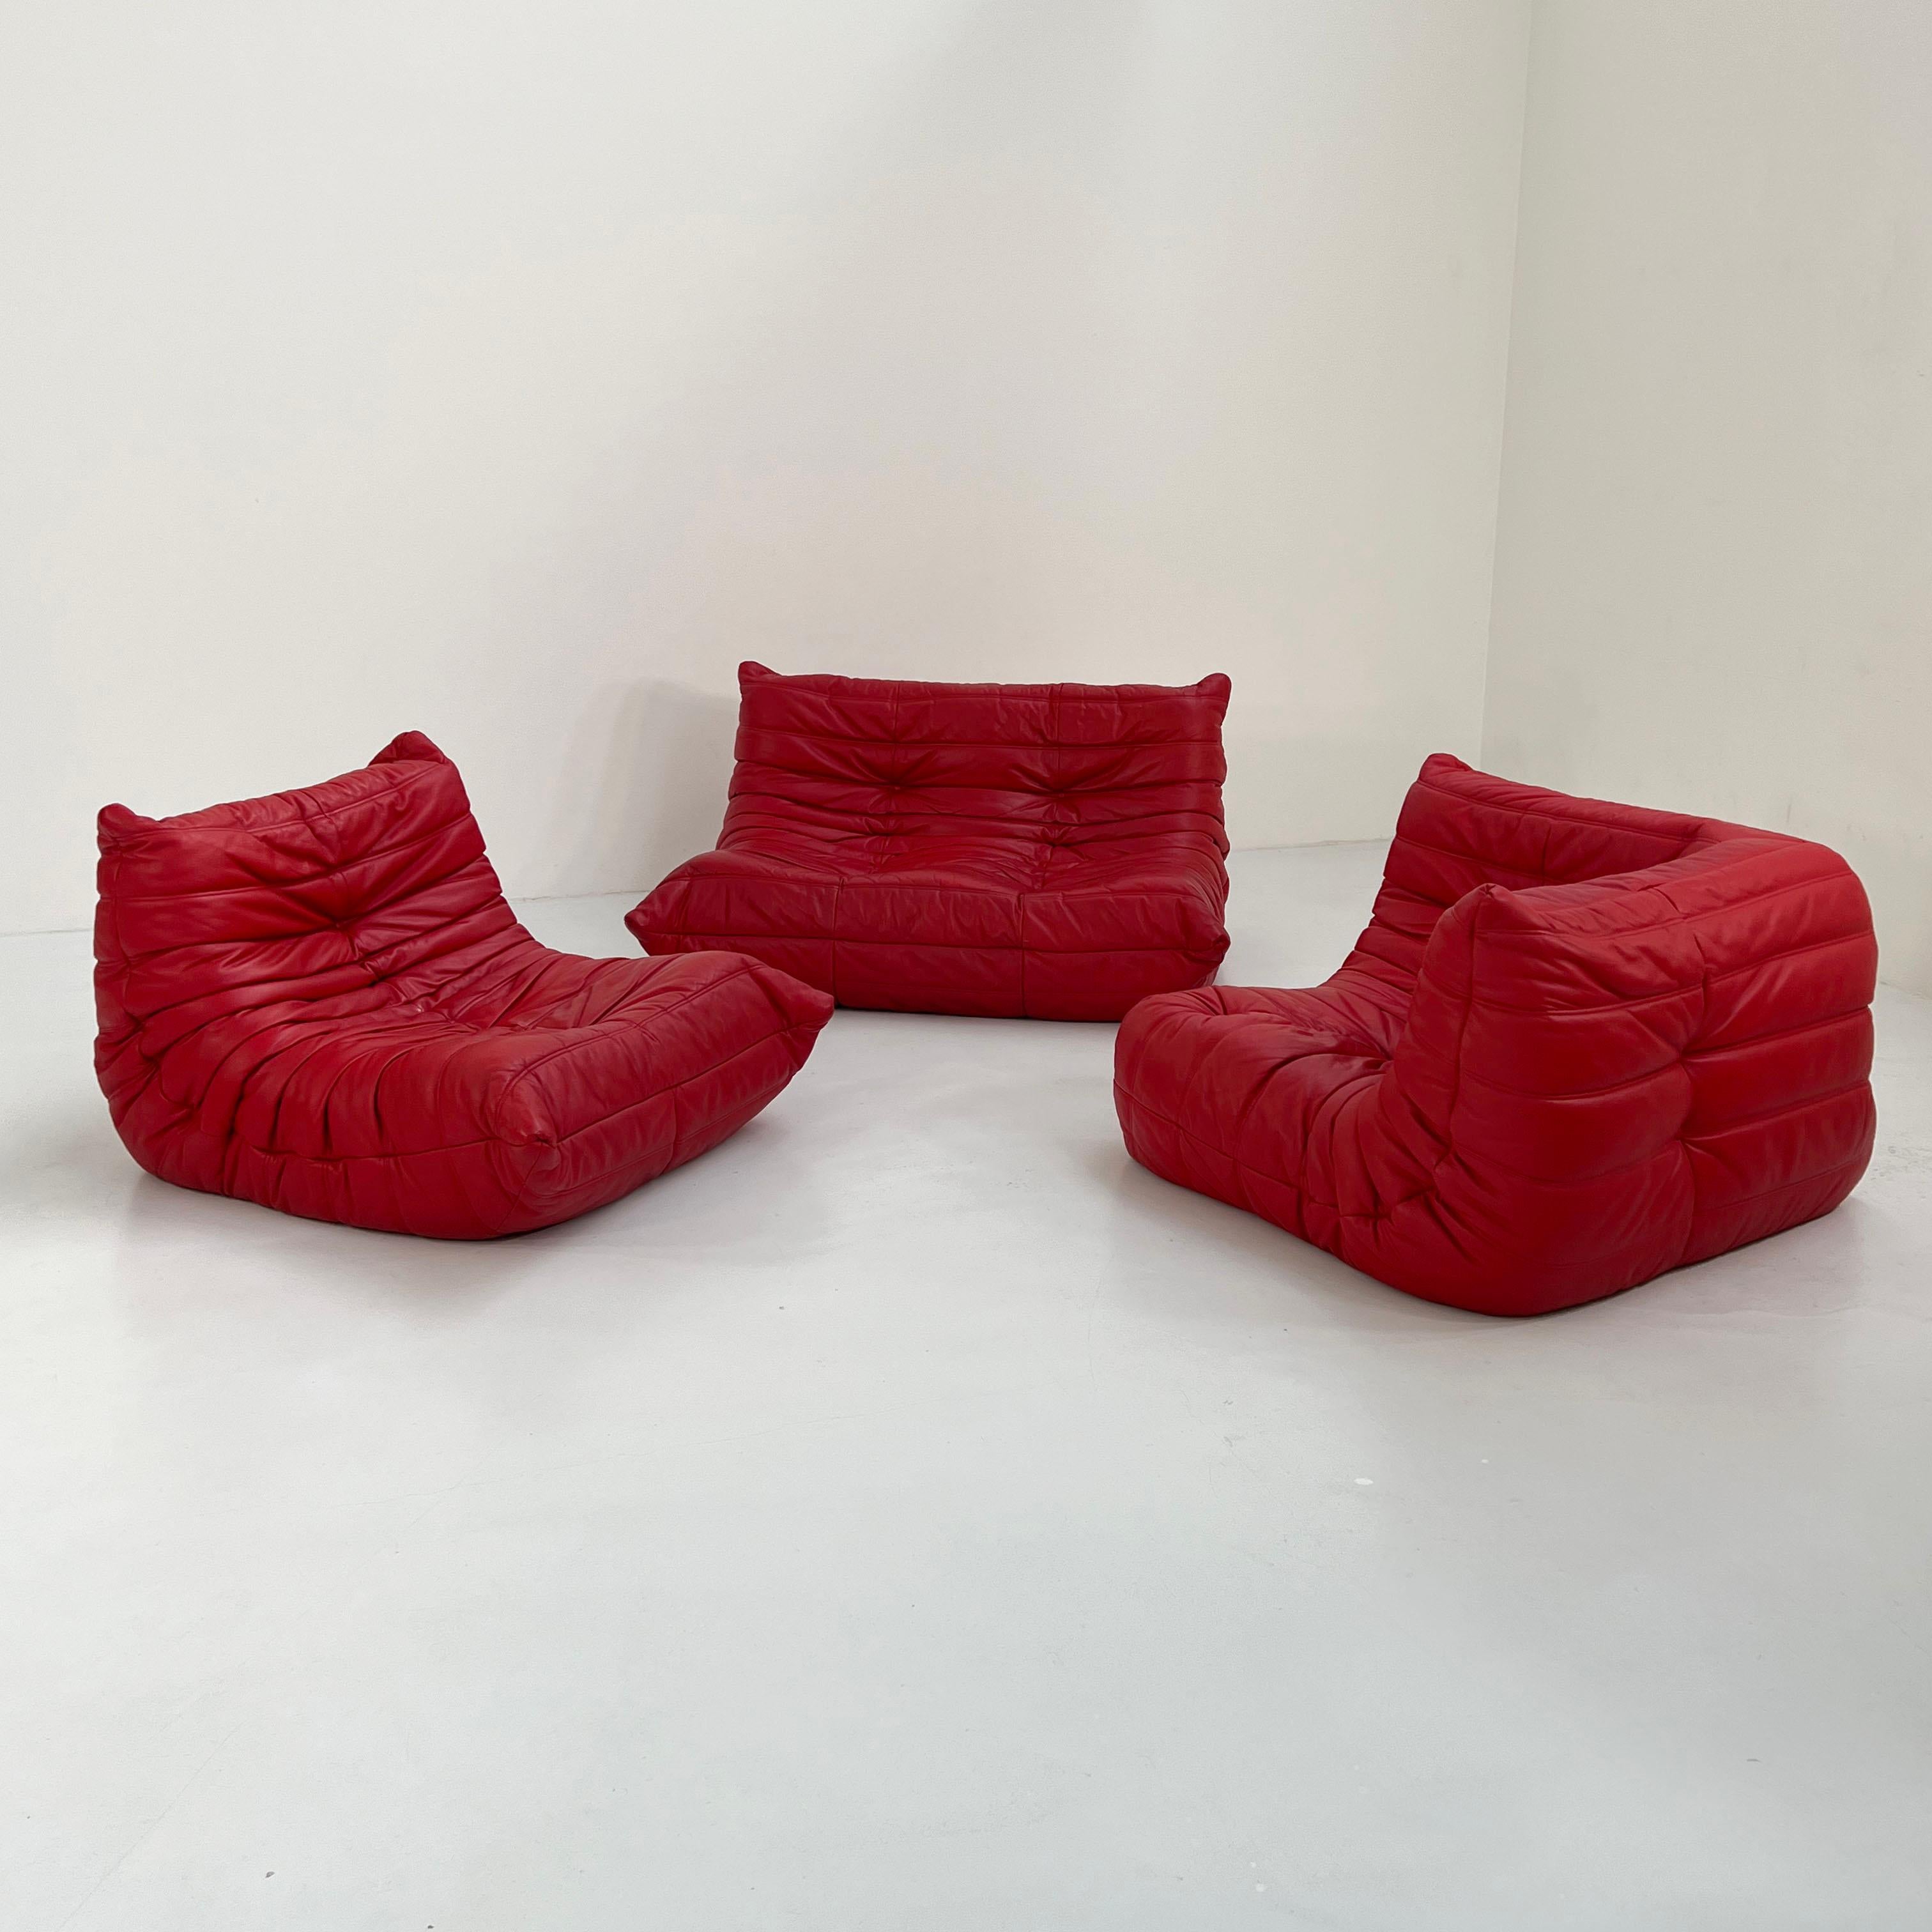 Togo Sofa Set in Red Leather by Michel Ducaroy for Ligne Roset, 1970s For Sale 9